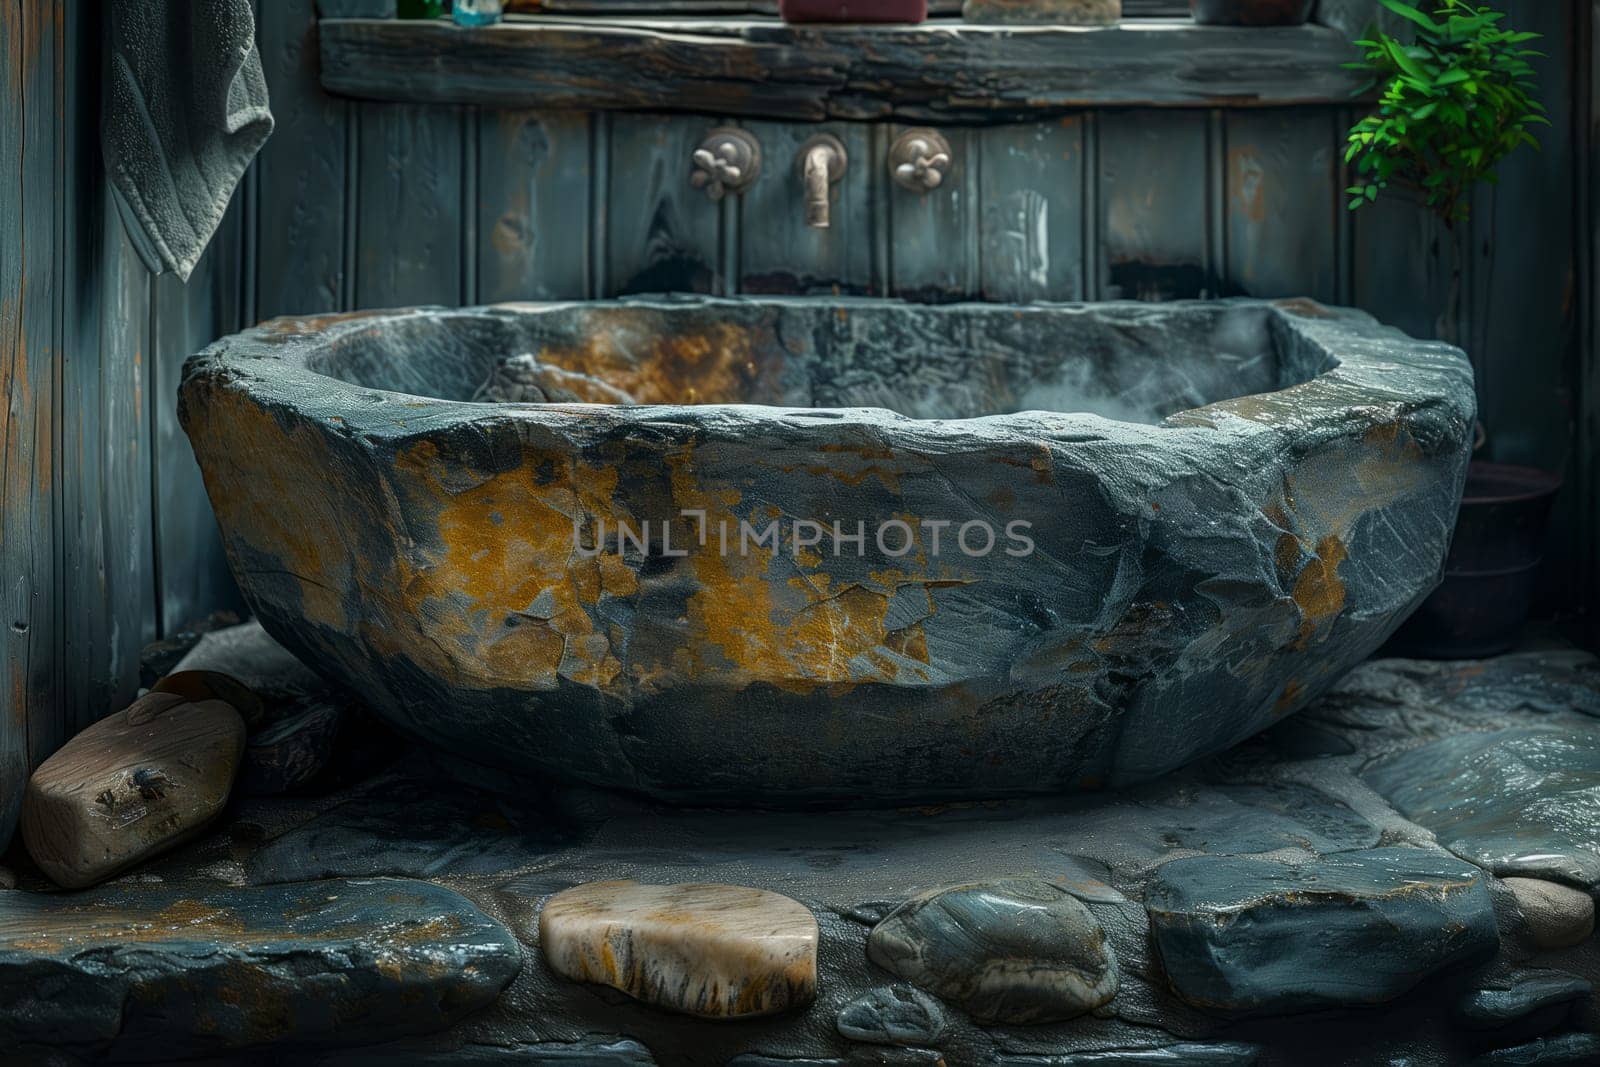 A gaspowered water feature made of bedrock is the centerpiece in the bathroom, with a large stone bathtub on a counter. The landscape includes wood accents and rocky art